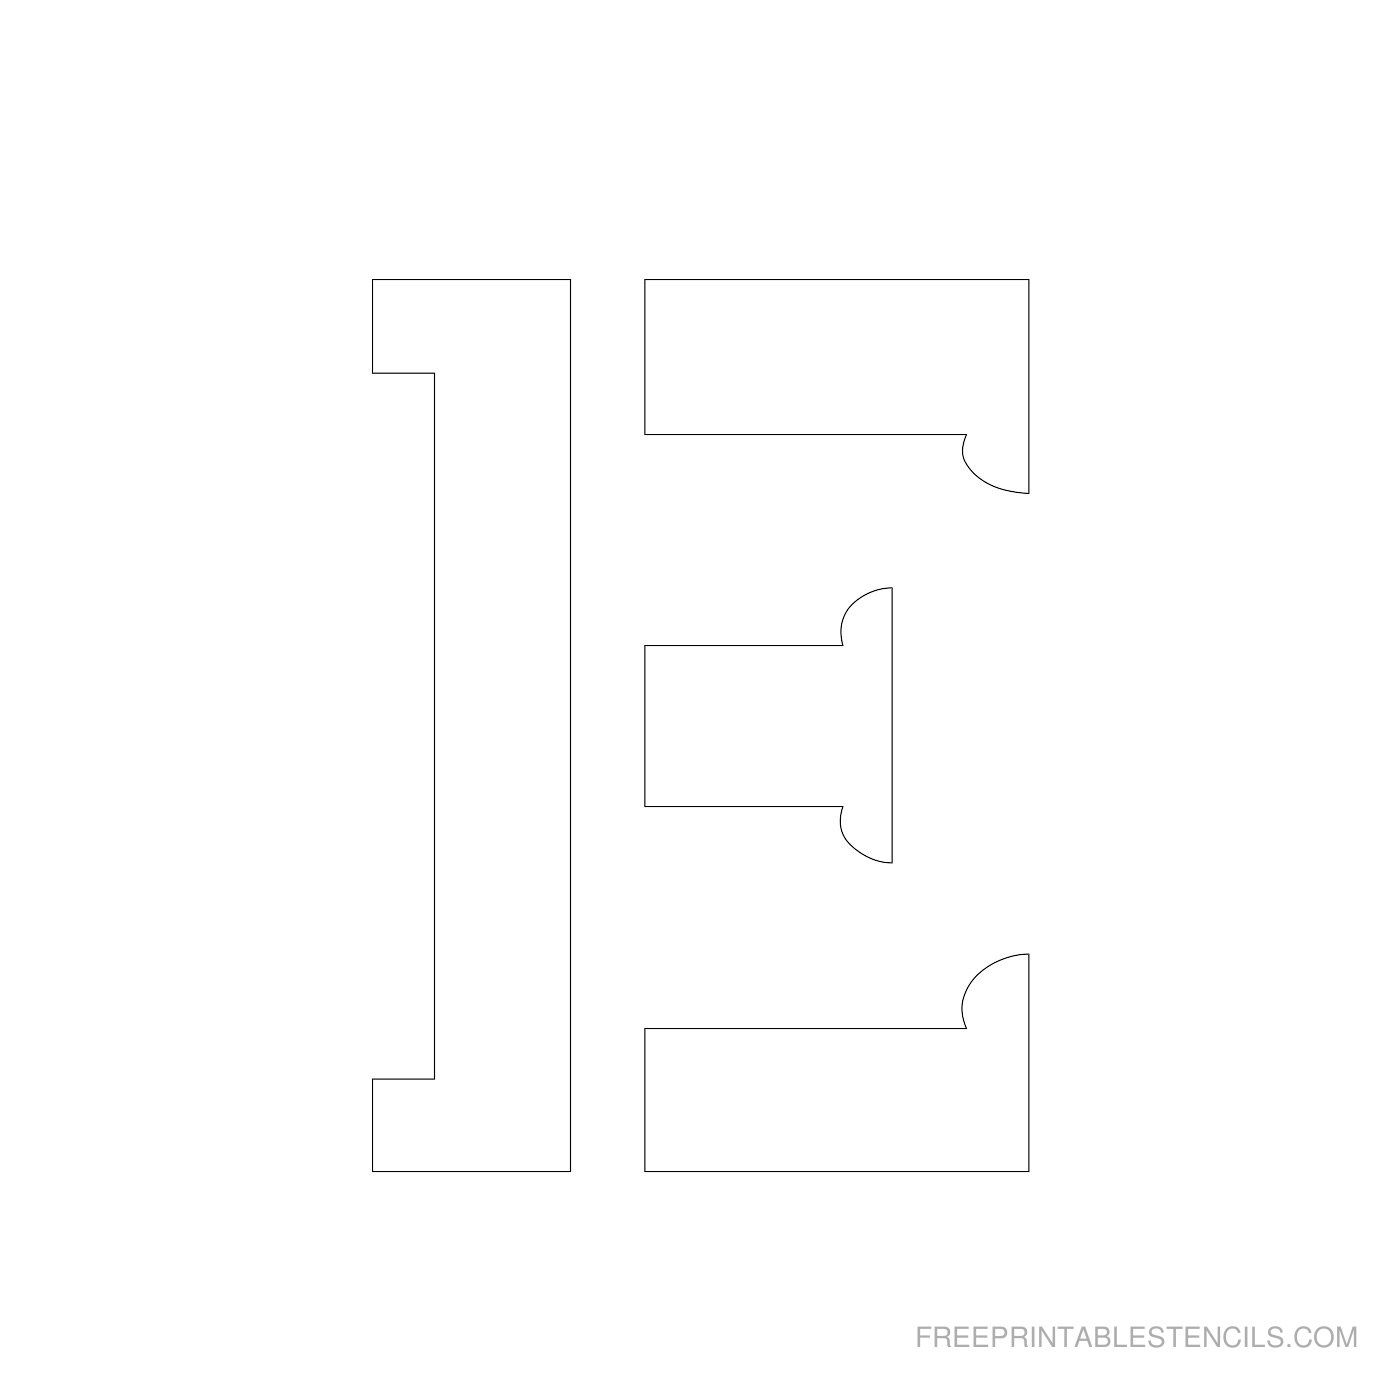 5 Inch Stencil Letters Stencil Letters Org Free Printable 4 Inch 